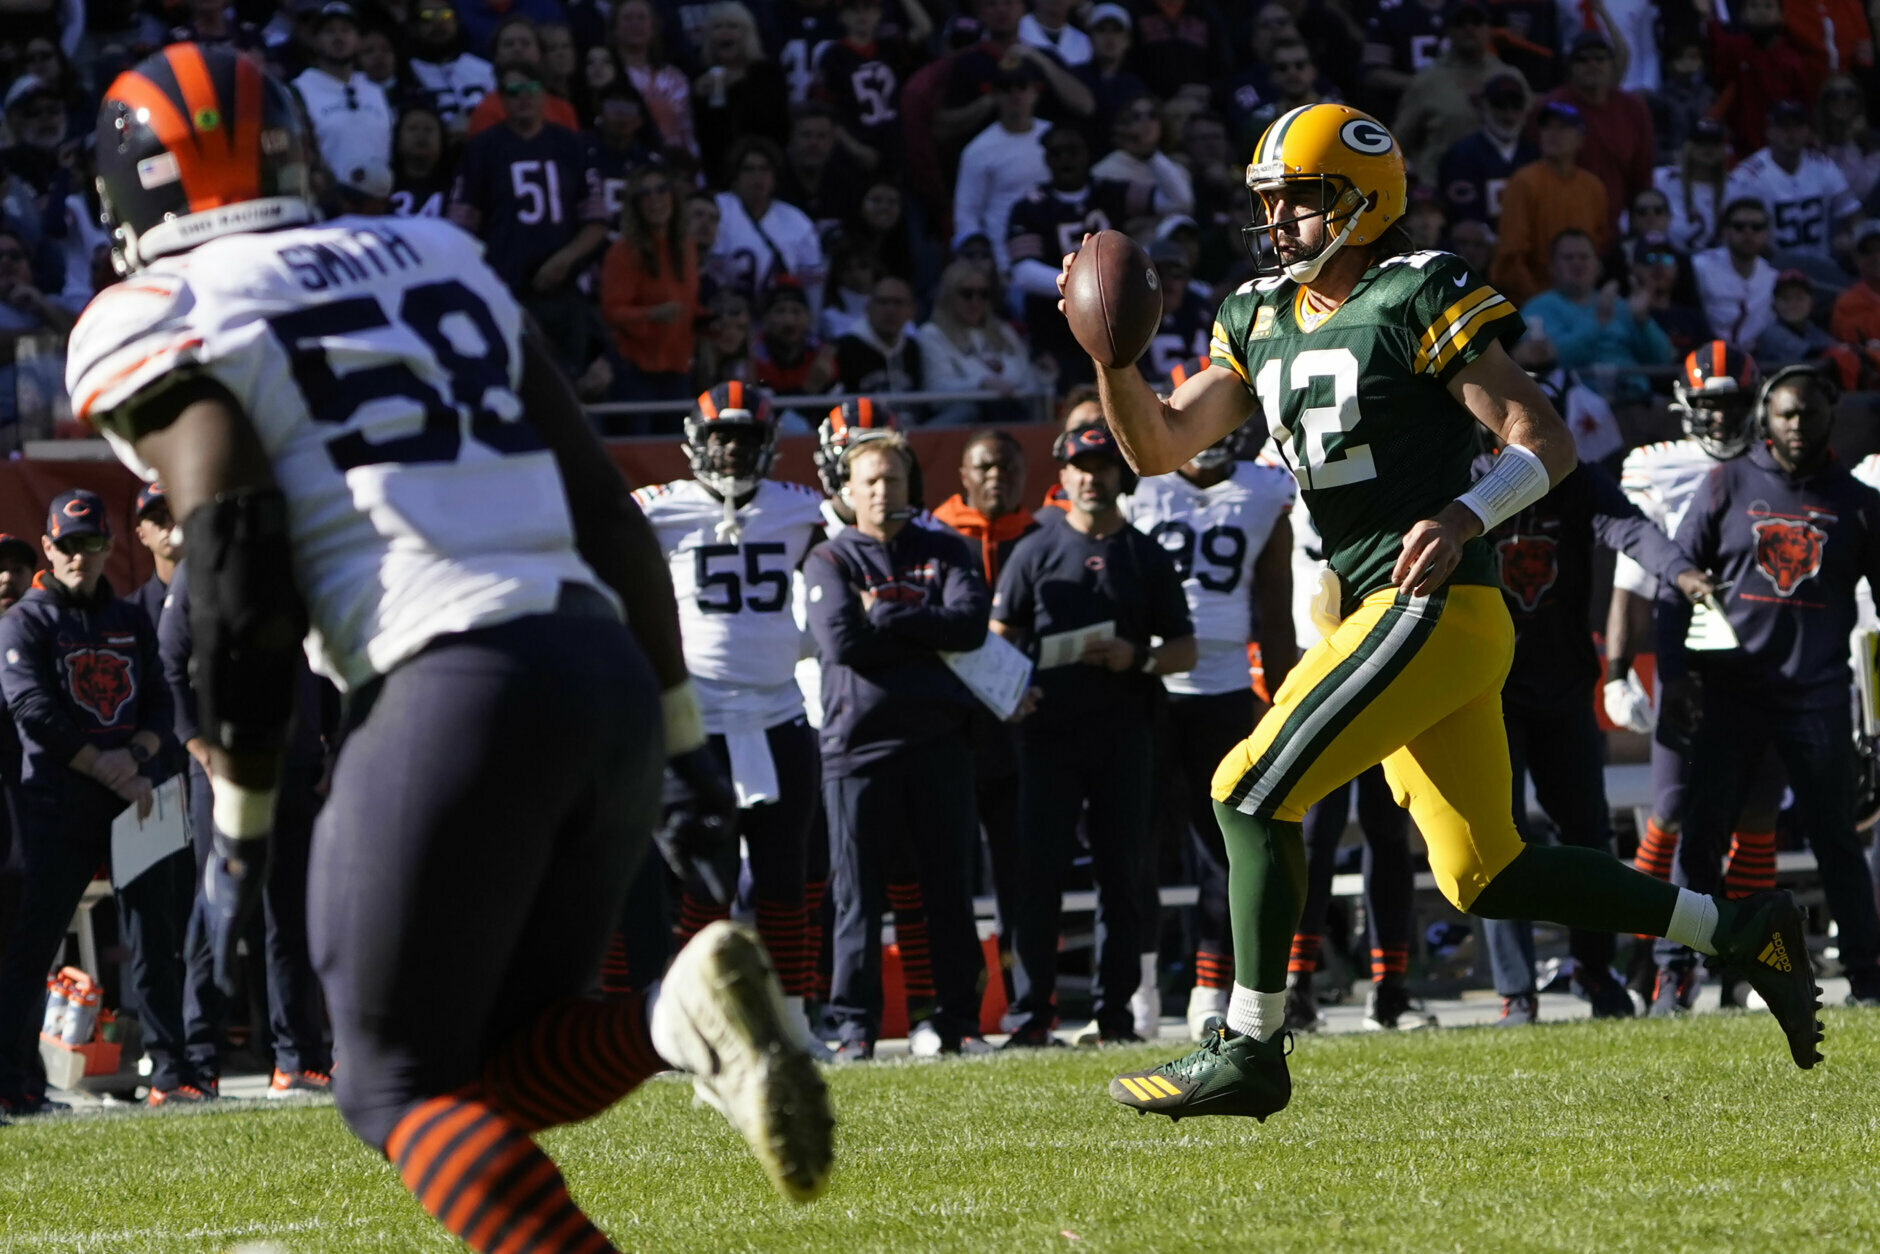 <p><b><i>Packers 24</i></b><br />
<b><i>Bears 14</i></b></p>
<p>Green Bay has won five straight, Aaron Rodgers&#8217; swag (<a href="https://www.espn.com/nfl/story/_/id/32419669/packers-qb-aaron-rodgers-taunts-jeering-bears-fans-game-clinching-td-run-own-you">and trash talk game</a>) is off the charts and the inept Washington defense is coming to Lambeau Field. If he owns the Bears, Rodgers is about to <a href="https://youtu.be/-JdCr_t1Rfg">Discount Double Check</a> all over the Burgundy and Gold.</p>
